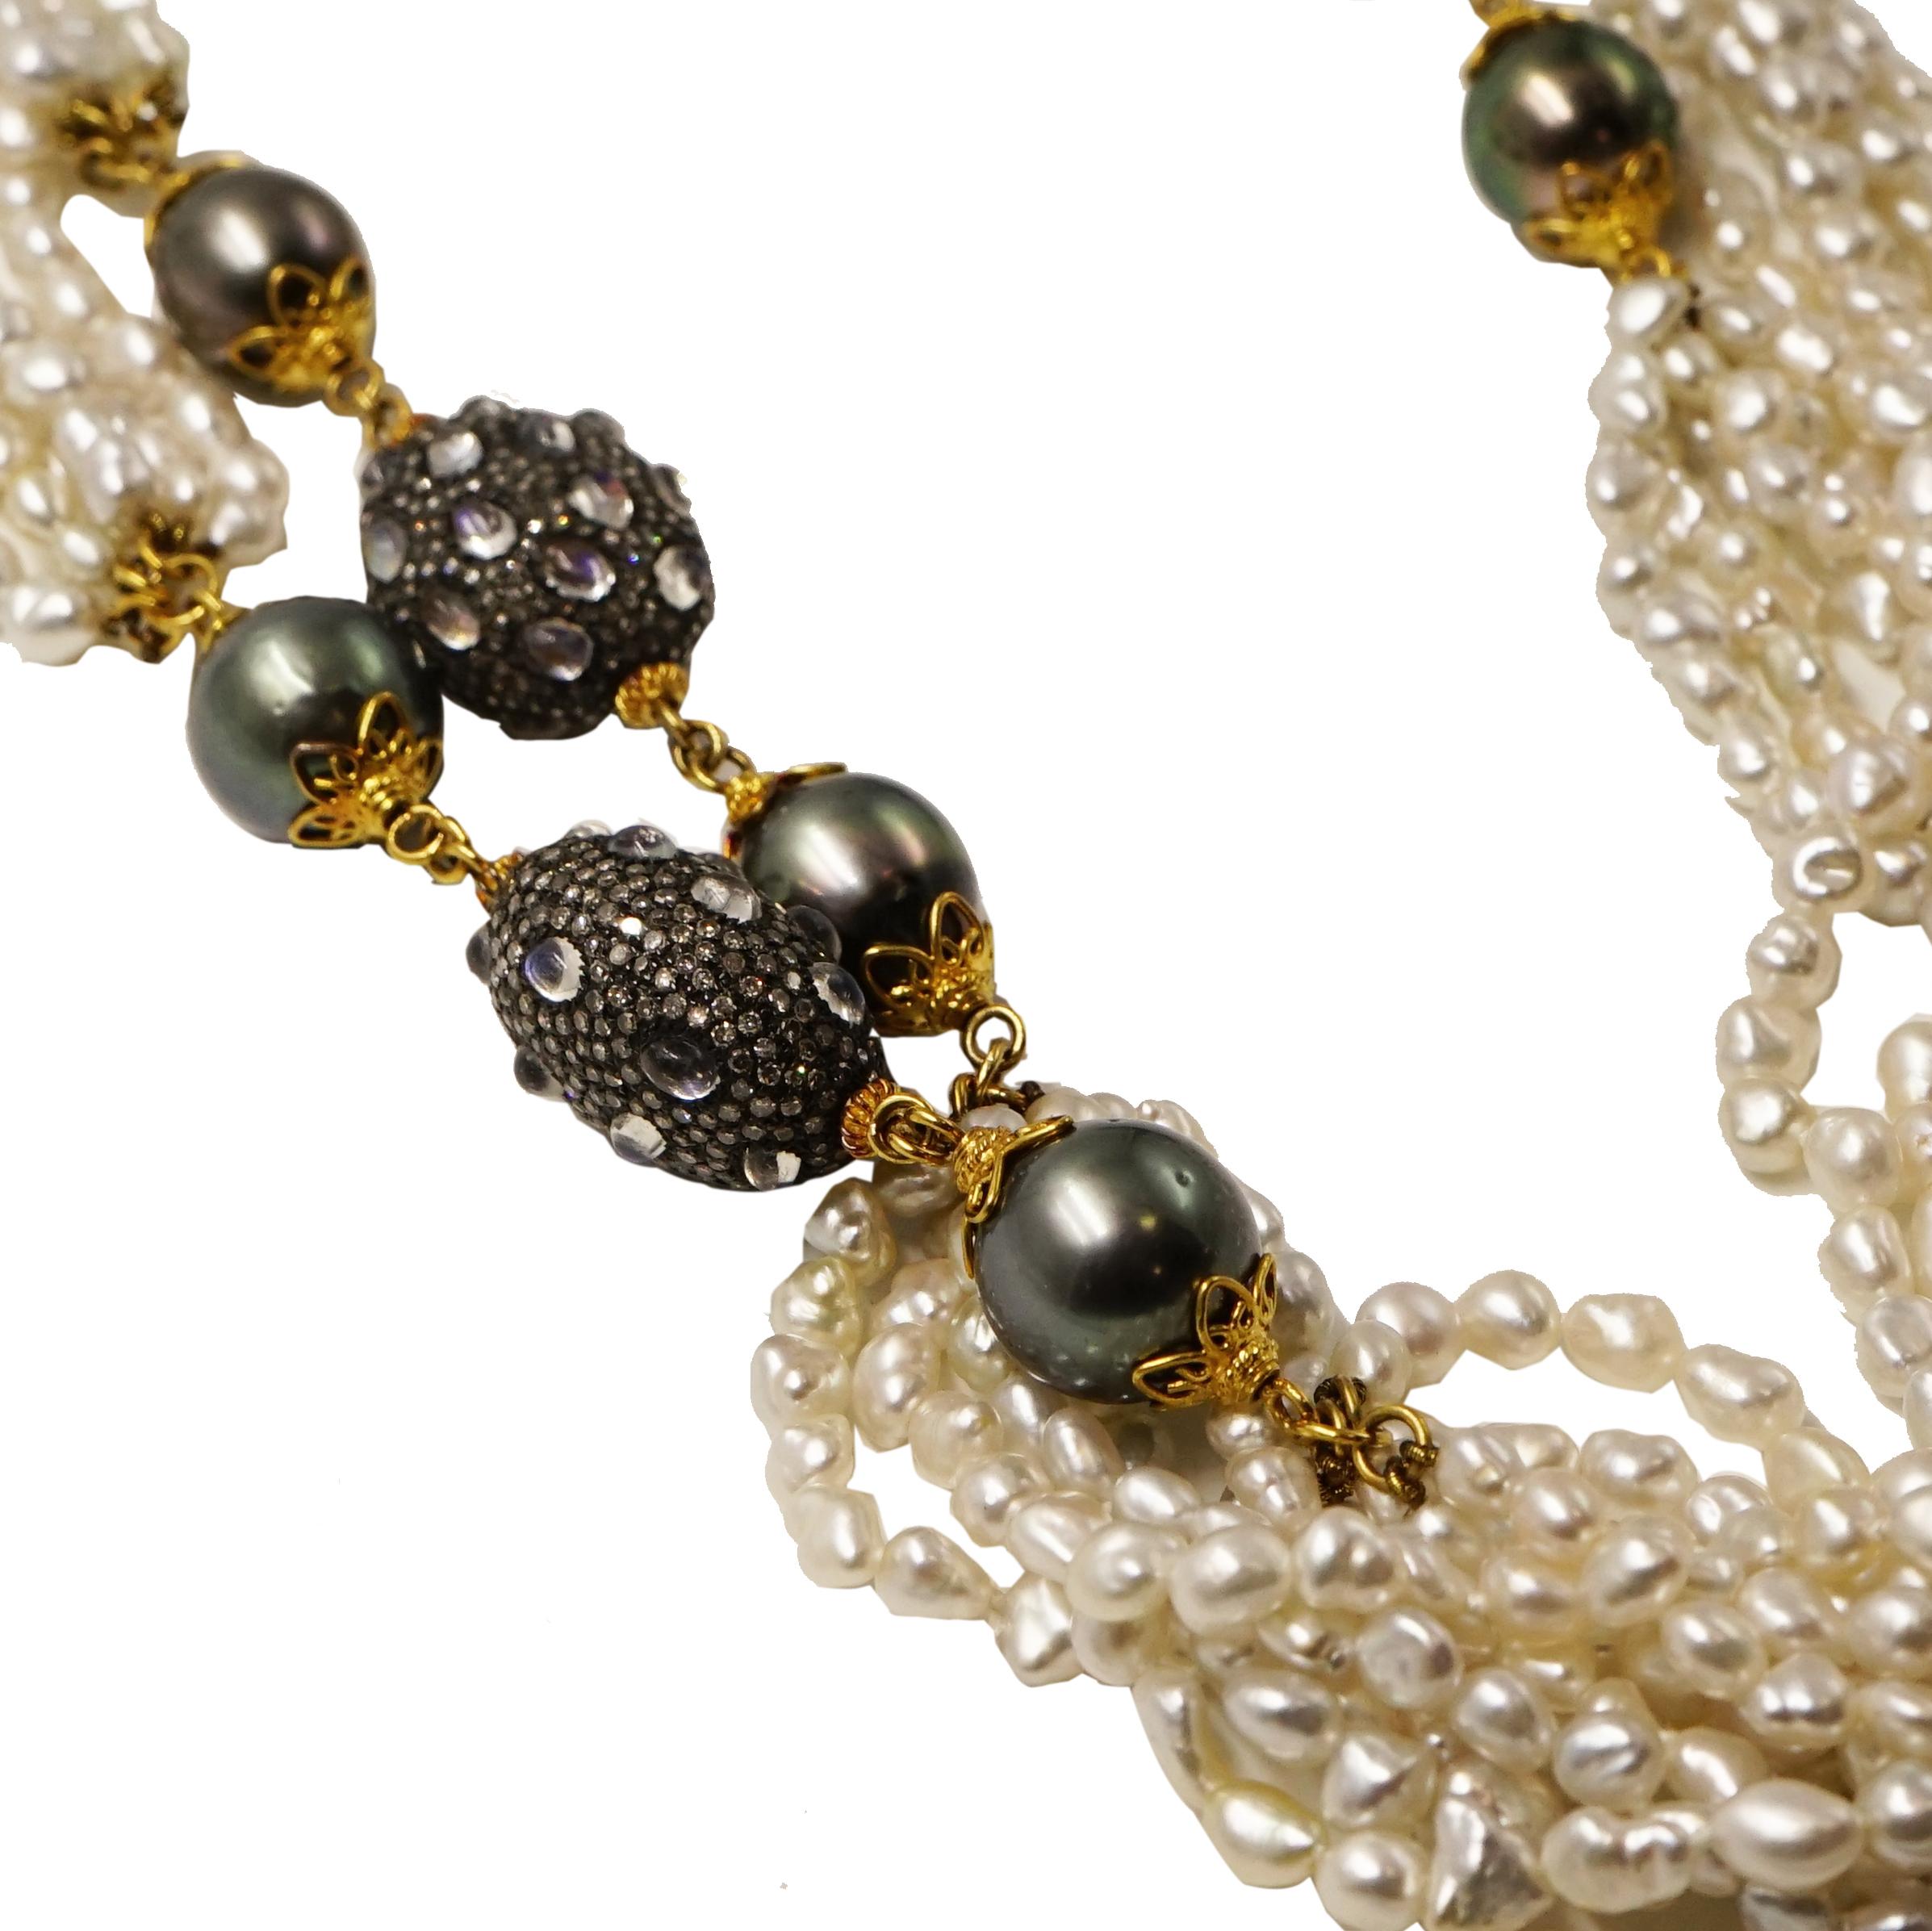 This magnificent Verdura Raja Necklace features 10 Peacock Tahitian cultured pearls, 6 strands of Keshi pearls, and 5 Moonstone dividers set in 18k Yellow Gold. 
A statement necklace that can be the perfect accent to a dress or T-shirt and